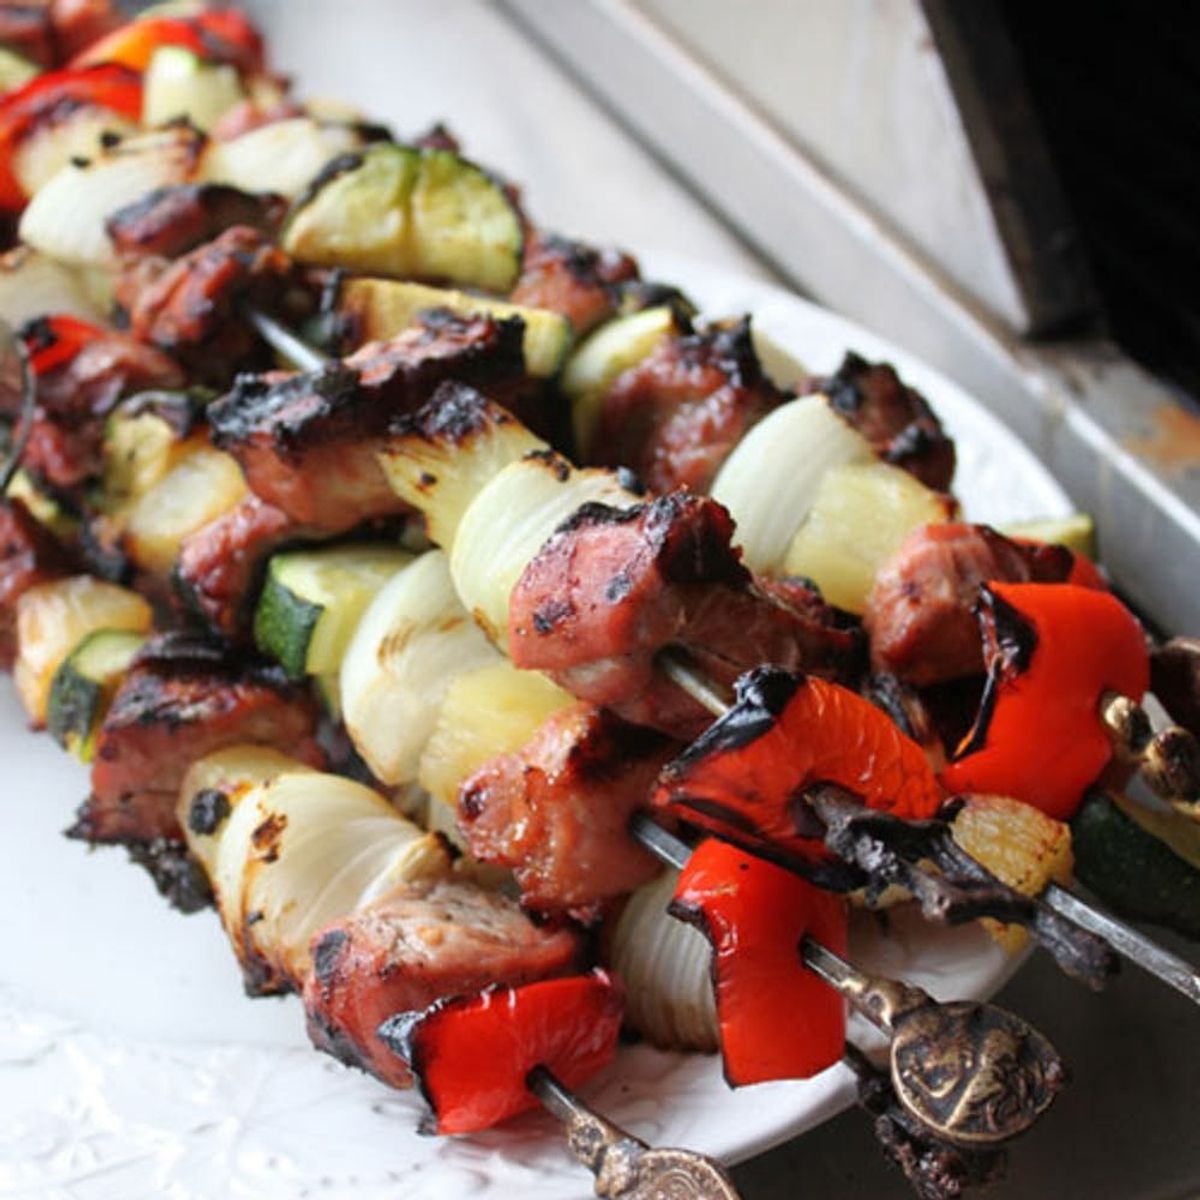 Get Your Grill On: Pineapple Pork Kabobs